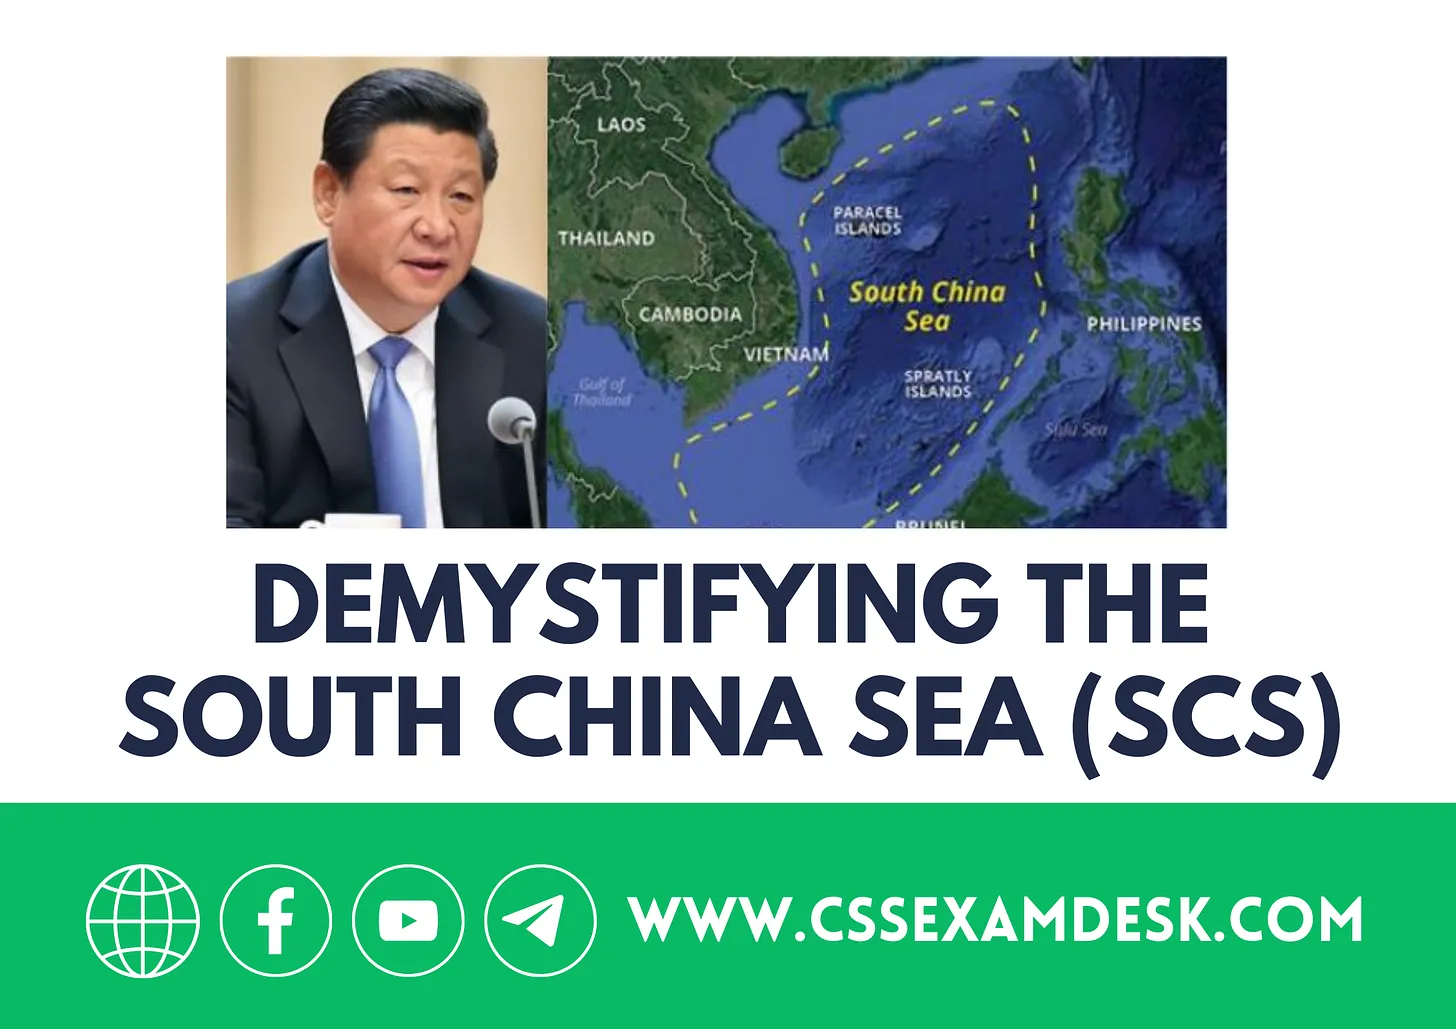 Demystifying the South China Sea (SCS)